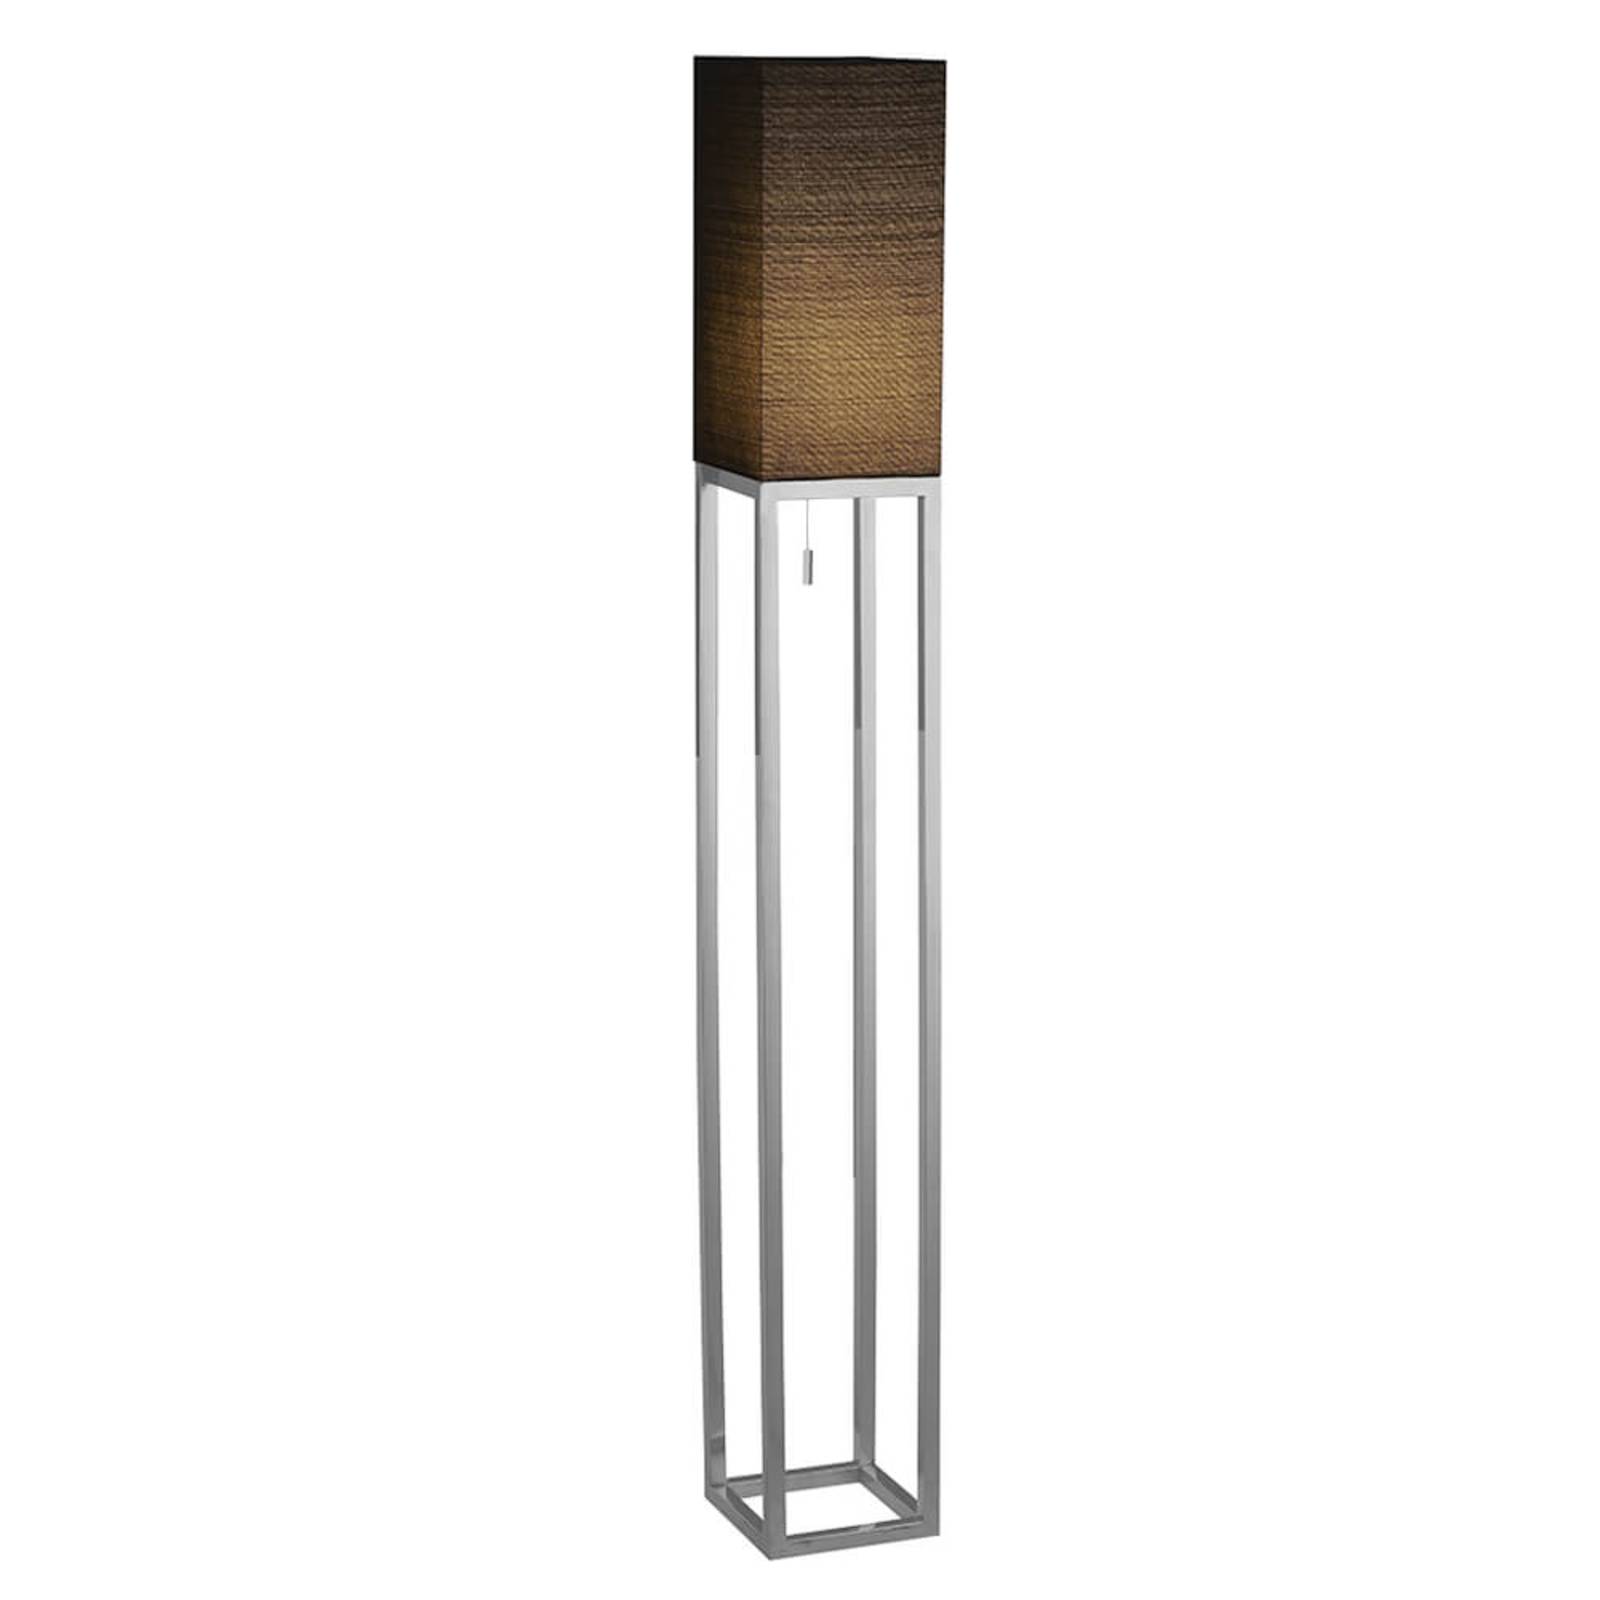 With pull switch - Mira fabric floor lamp